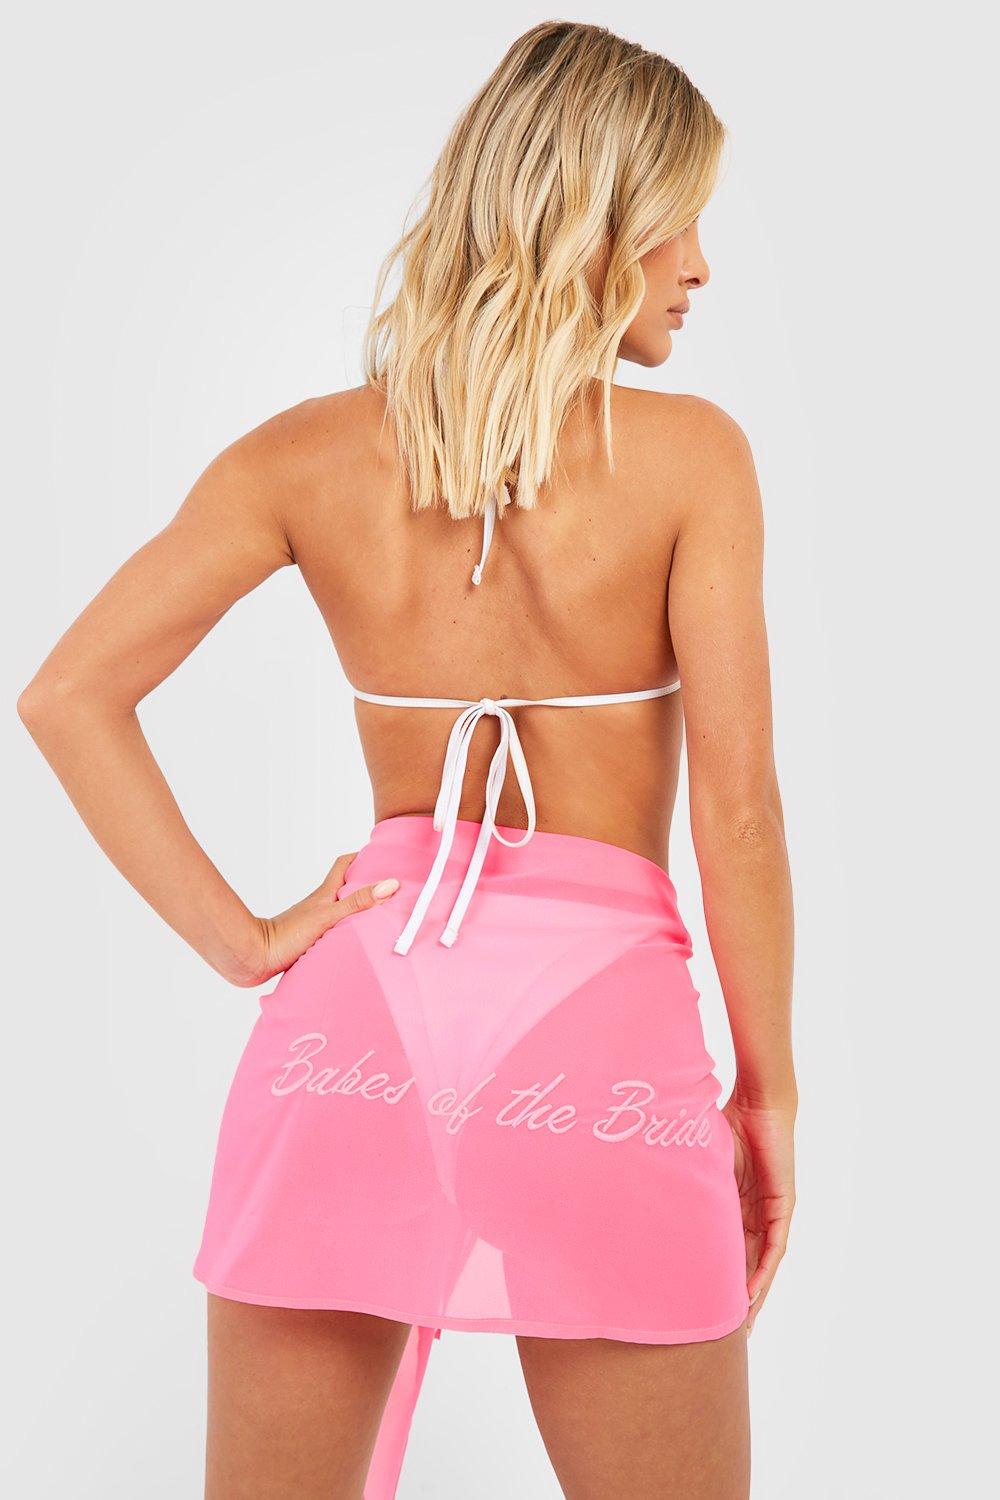 Babes Of The Bride Embroidered Beach Sarong